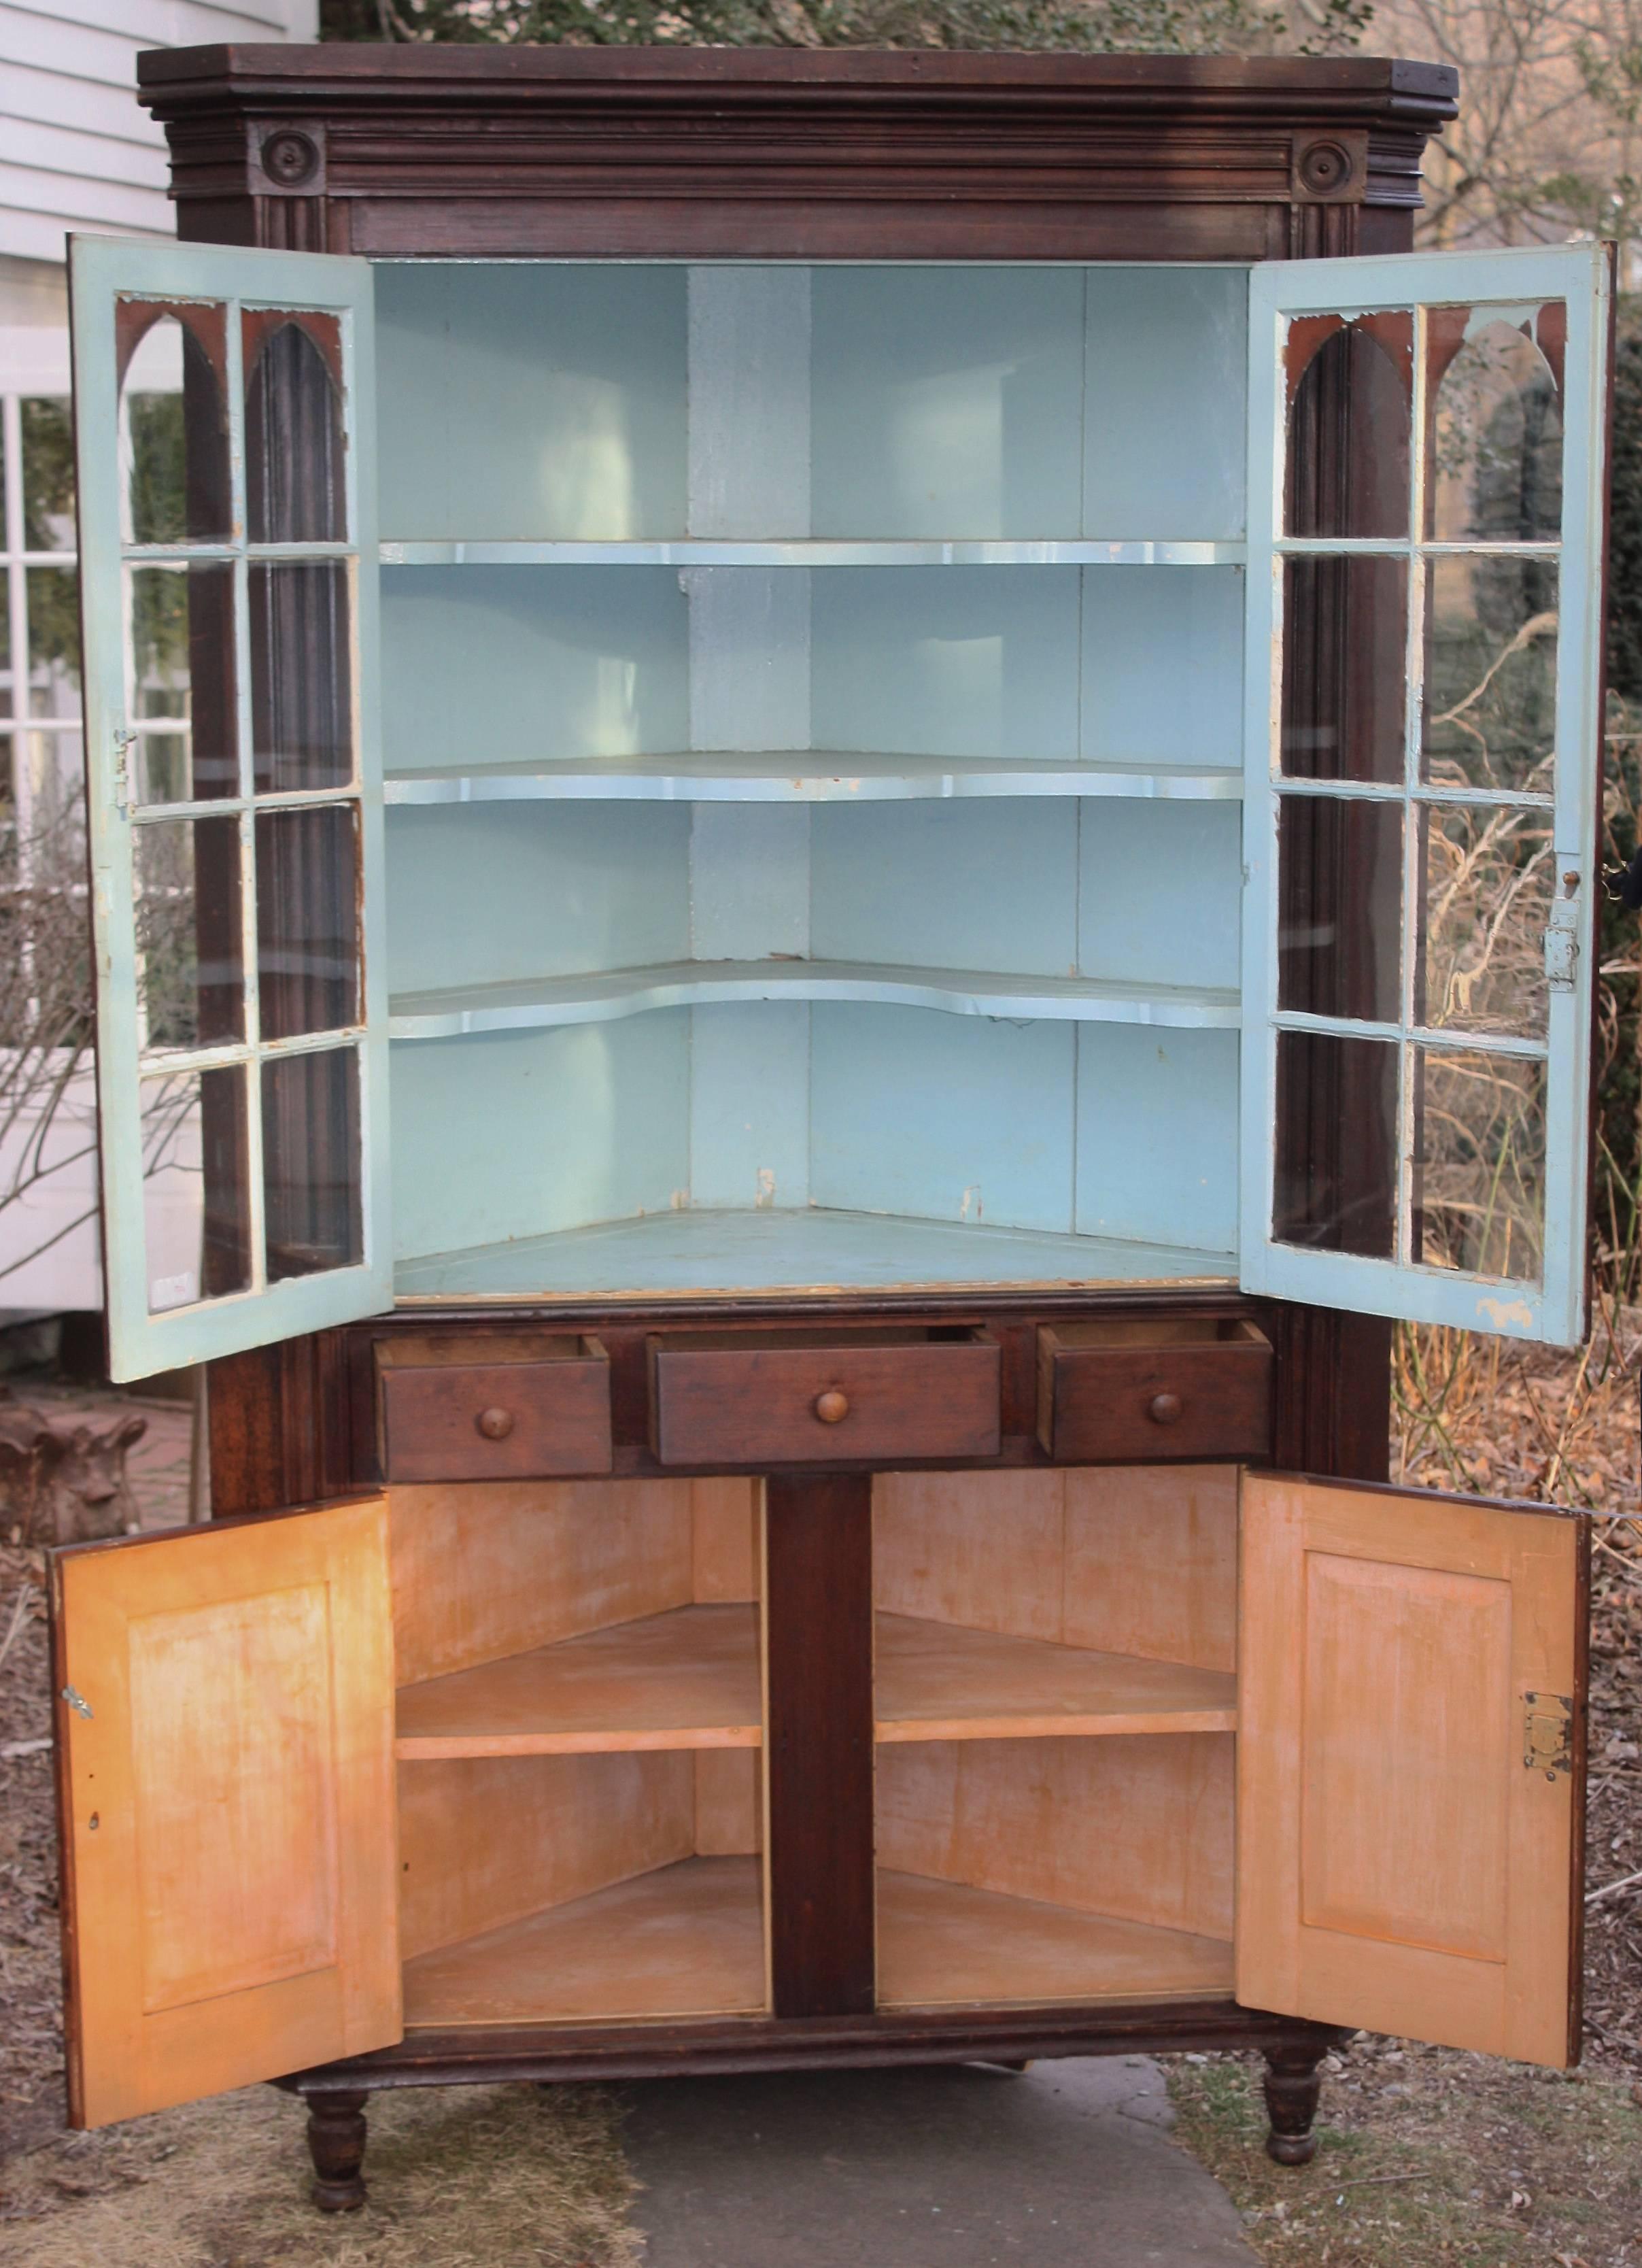 An imposing two-part 'mahoganized' cherrywood corner cabinet in the Sheraton manner; in original finish with mostly original glazing. Gothic applied mullion arches, stubby turned feet and cherry primary wood; likely Middle Atlantic states origin,